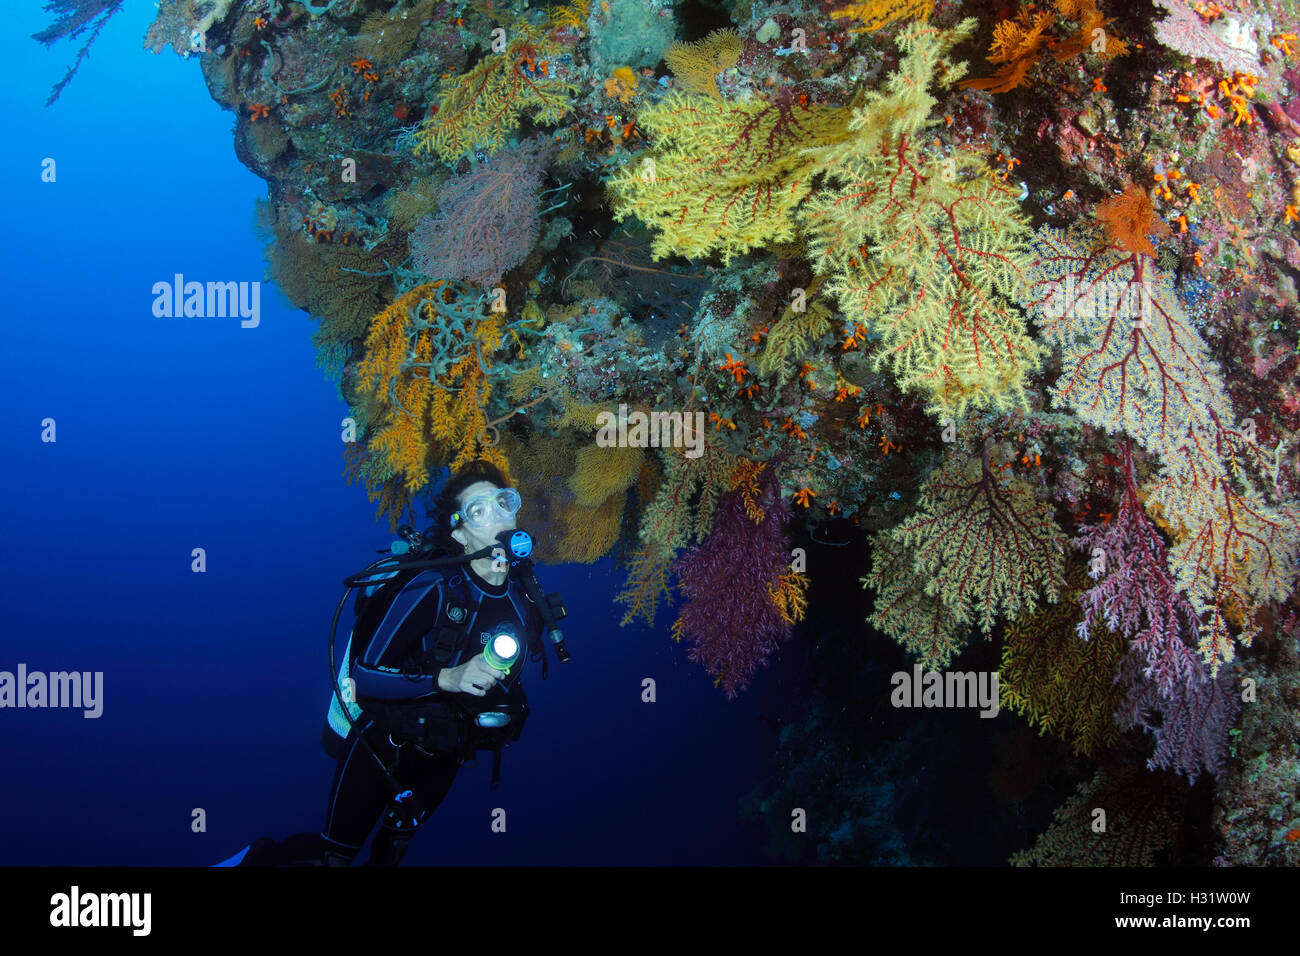 QZ40364-D. scuba diver (model released) swims along colorful reef wall covered with soft corals (Chironephthya sp.). Australia,  Stock Photo